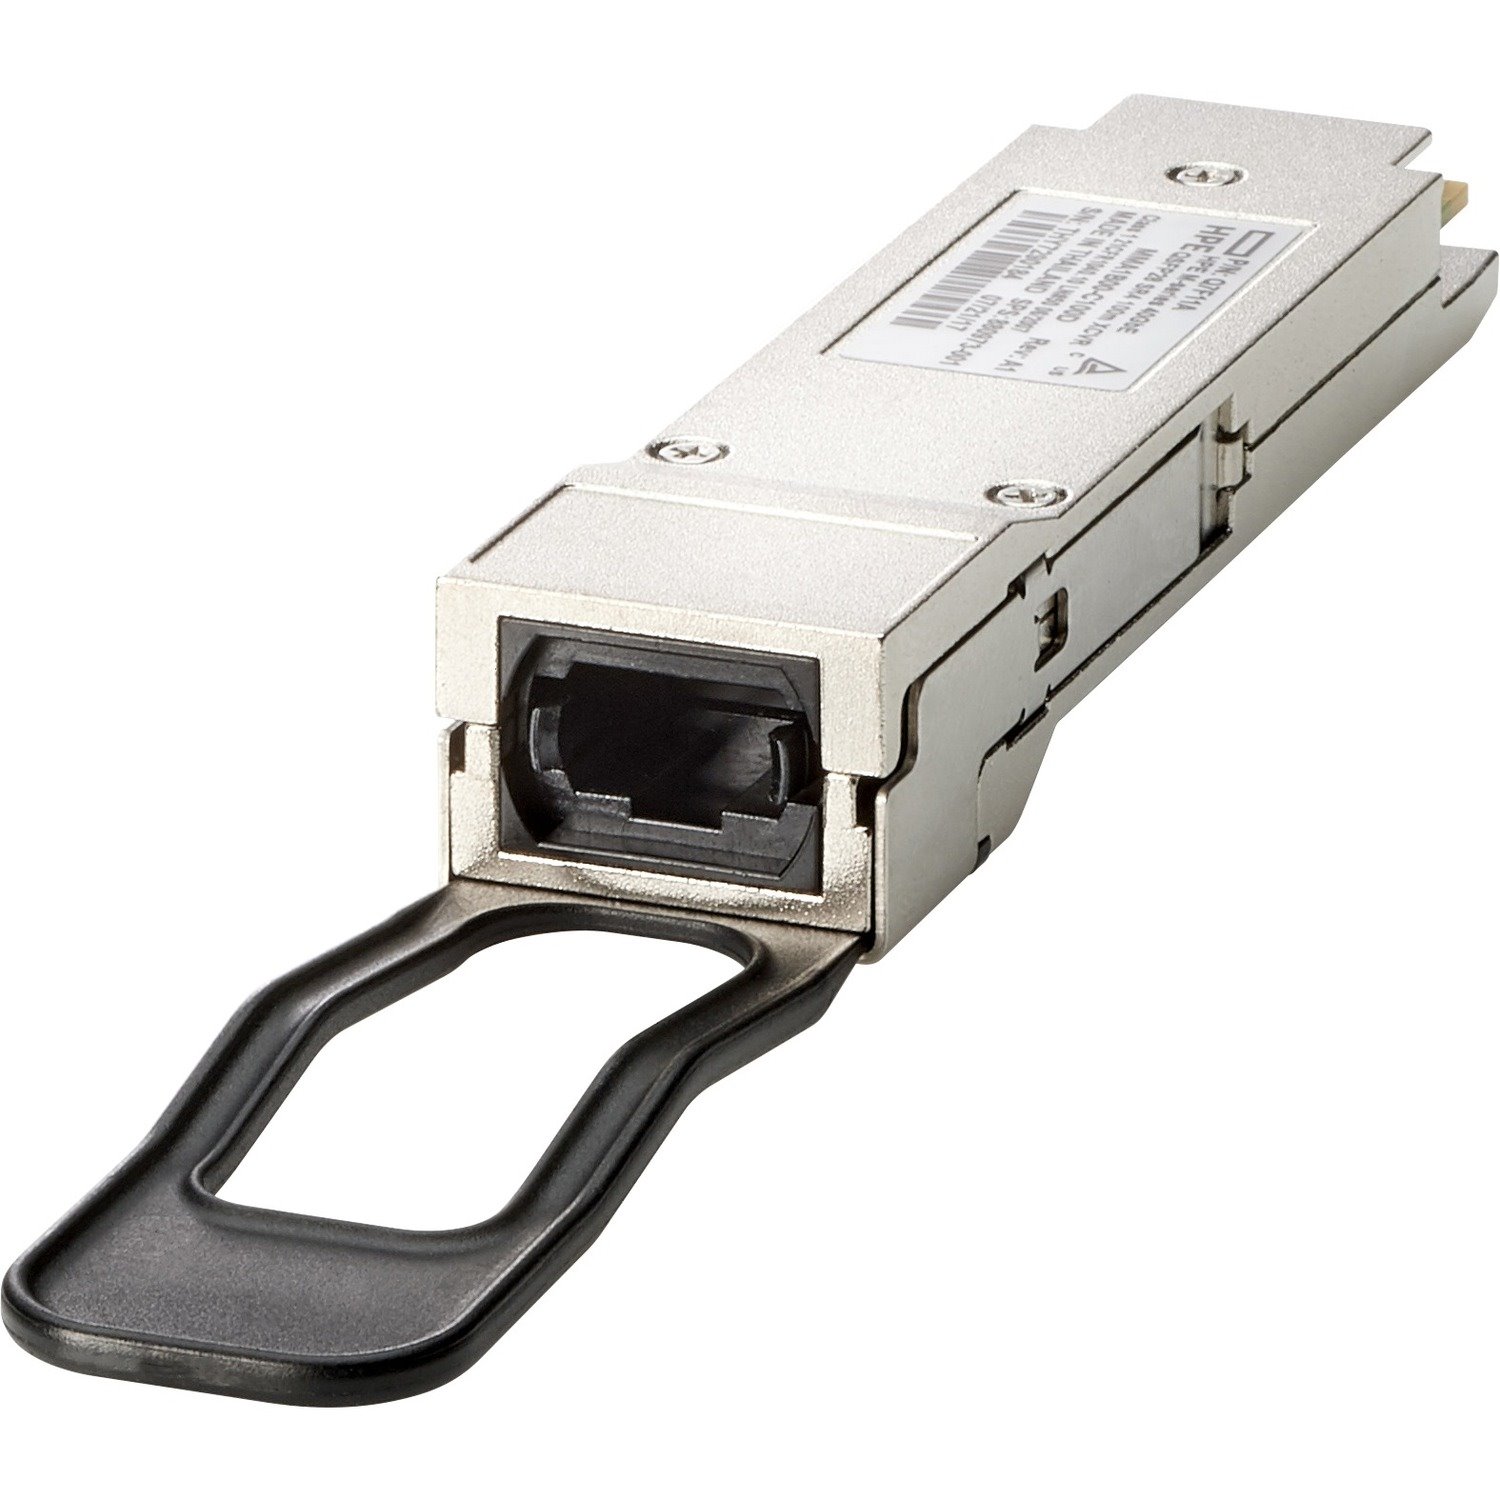 HPE QSFP28 - 1 x MPO 40GBase-SR4 Network